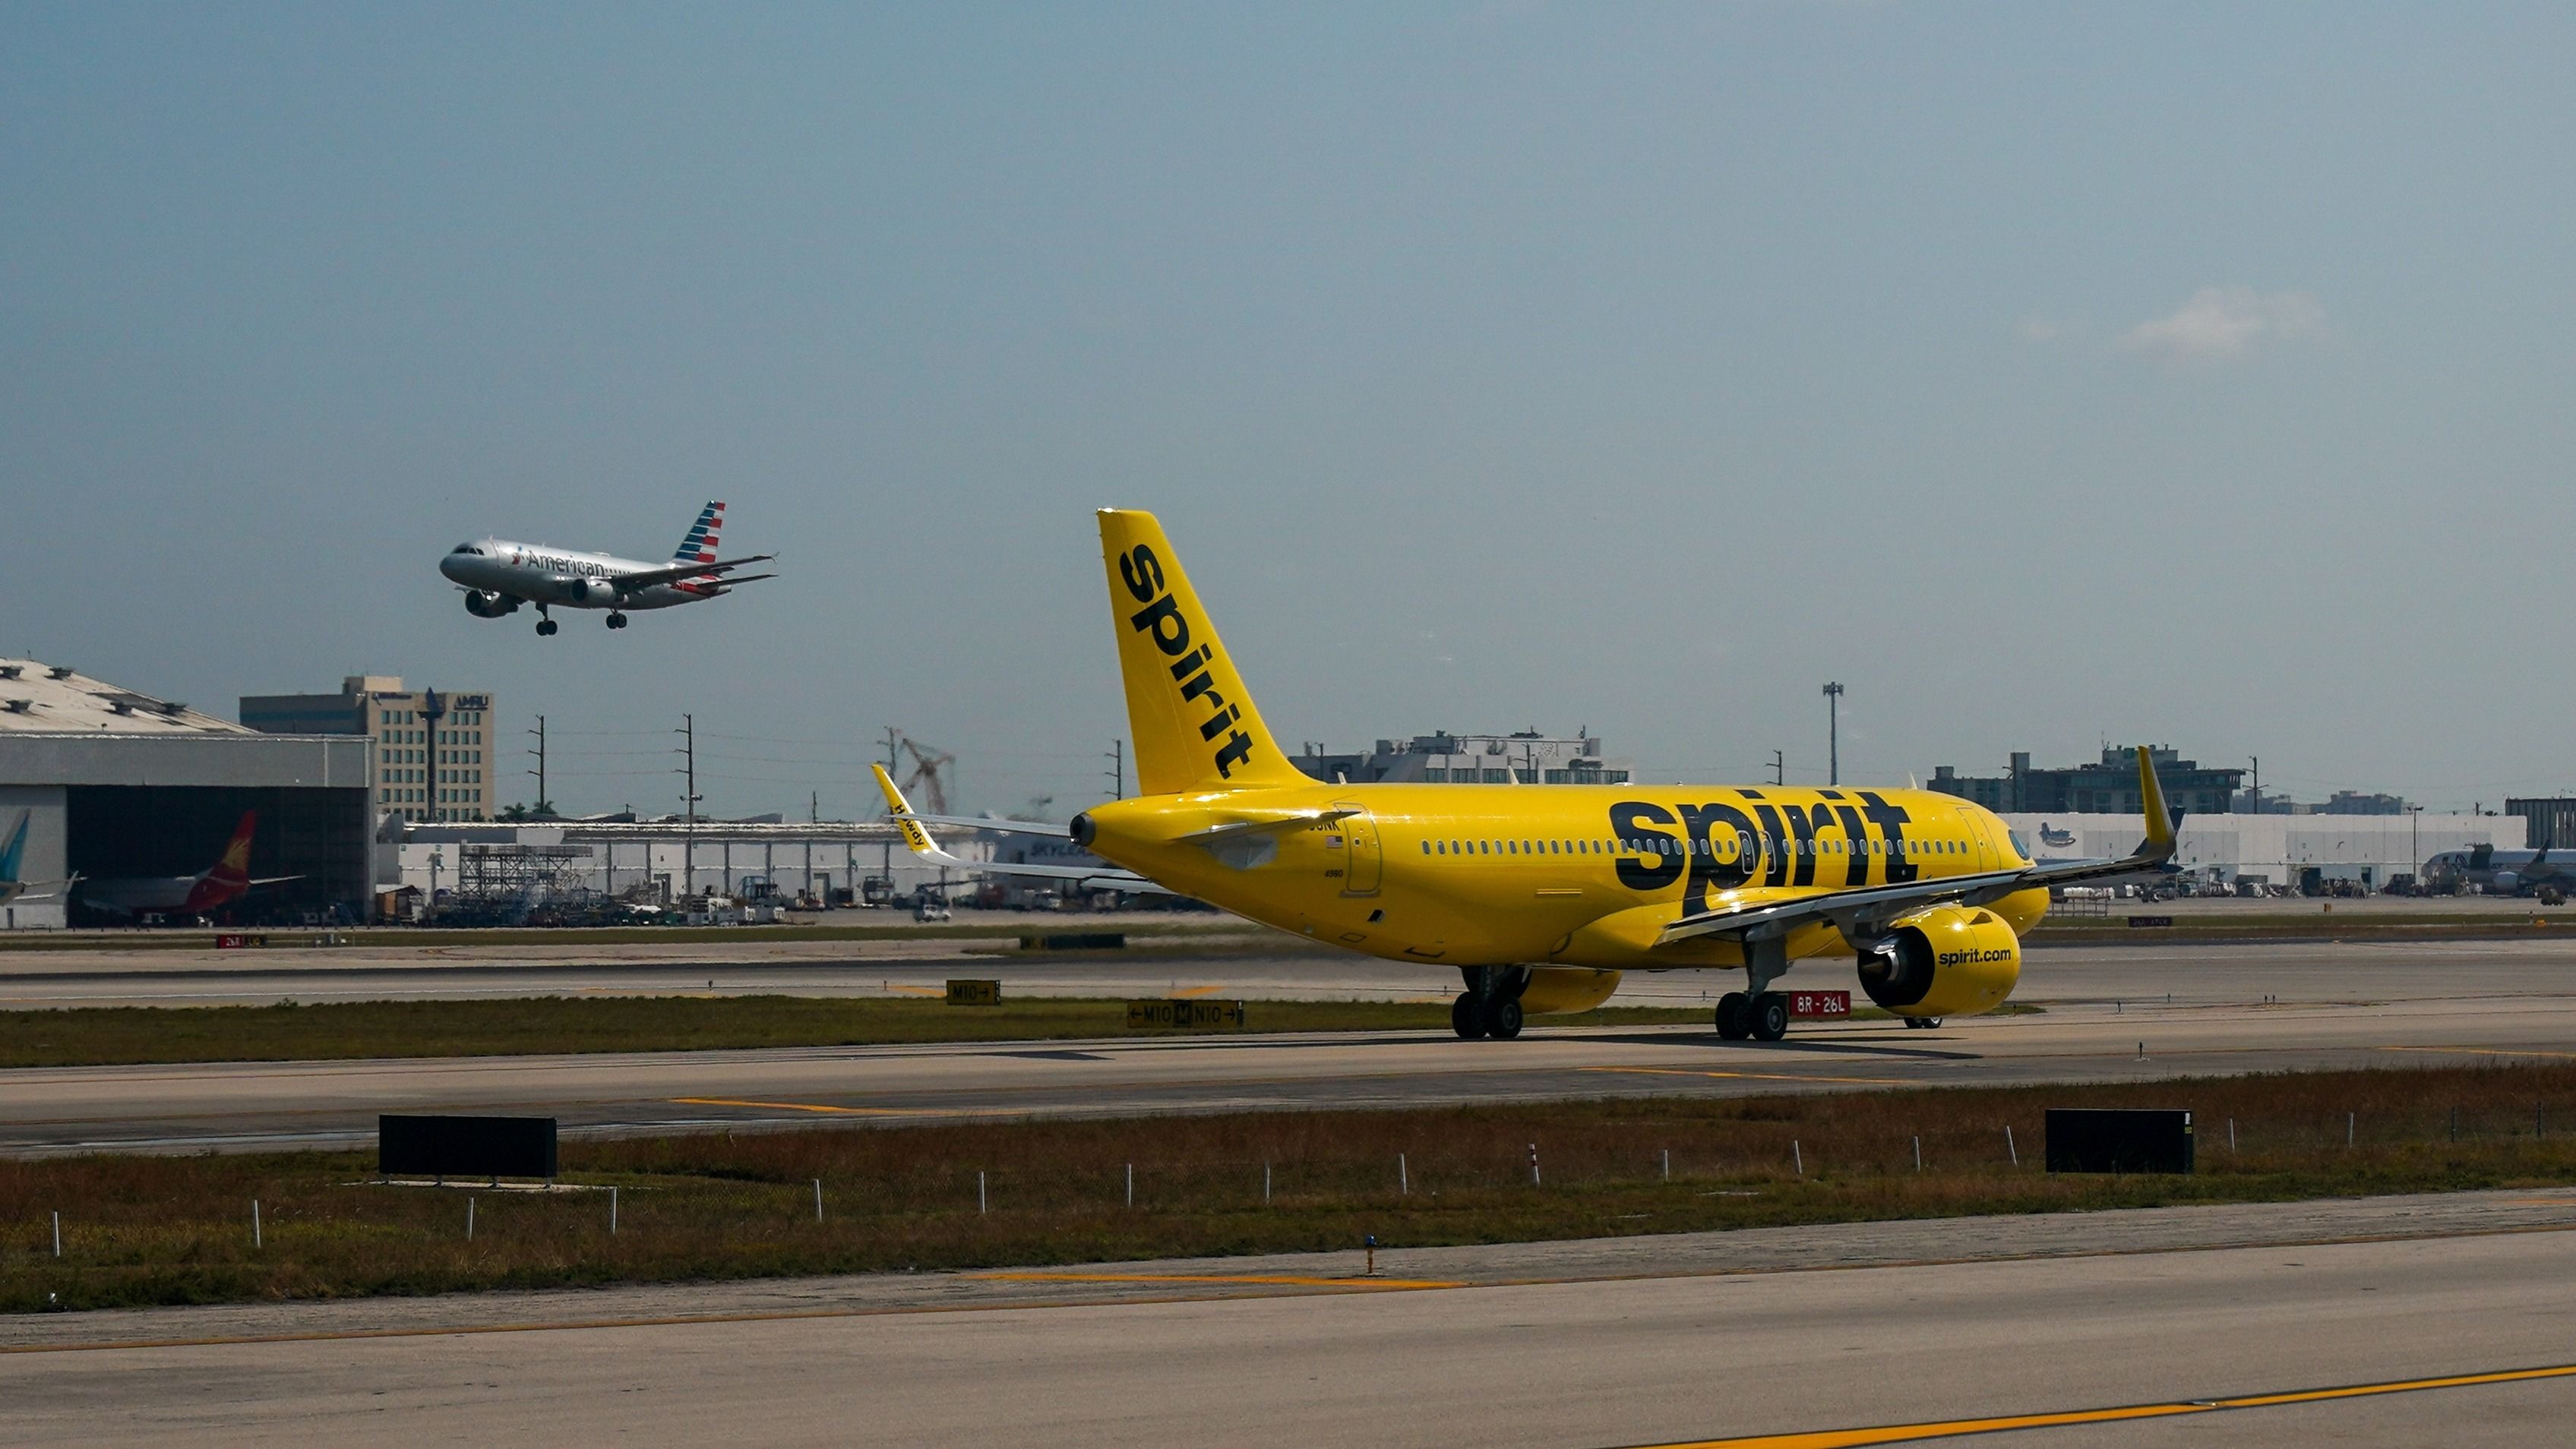 A Spirit Airlines aircraft on the apron at Miami International Airport as an American Airlines aircraft comes in to land..